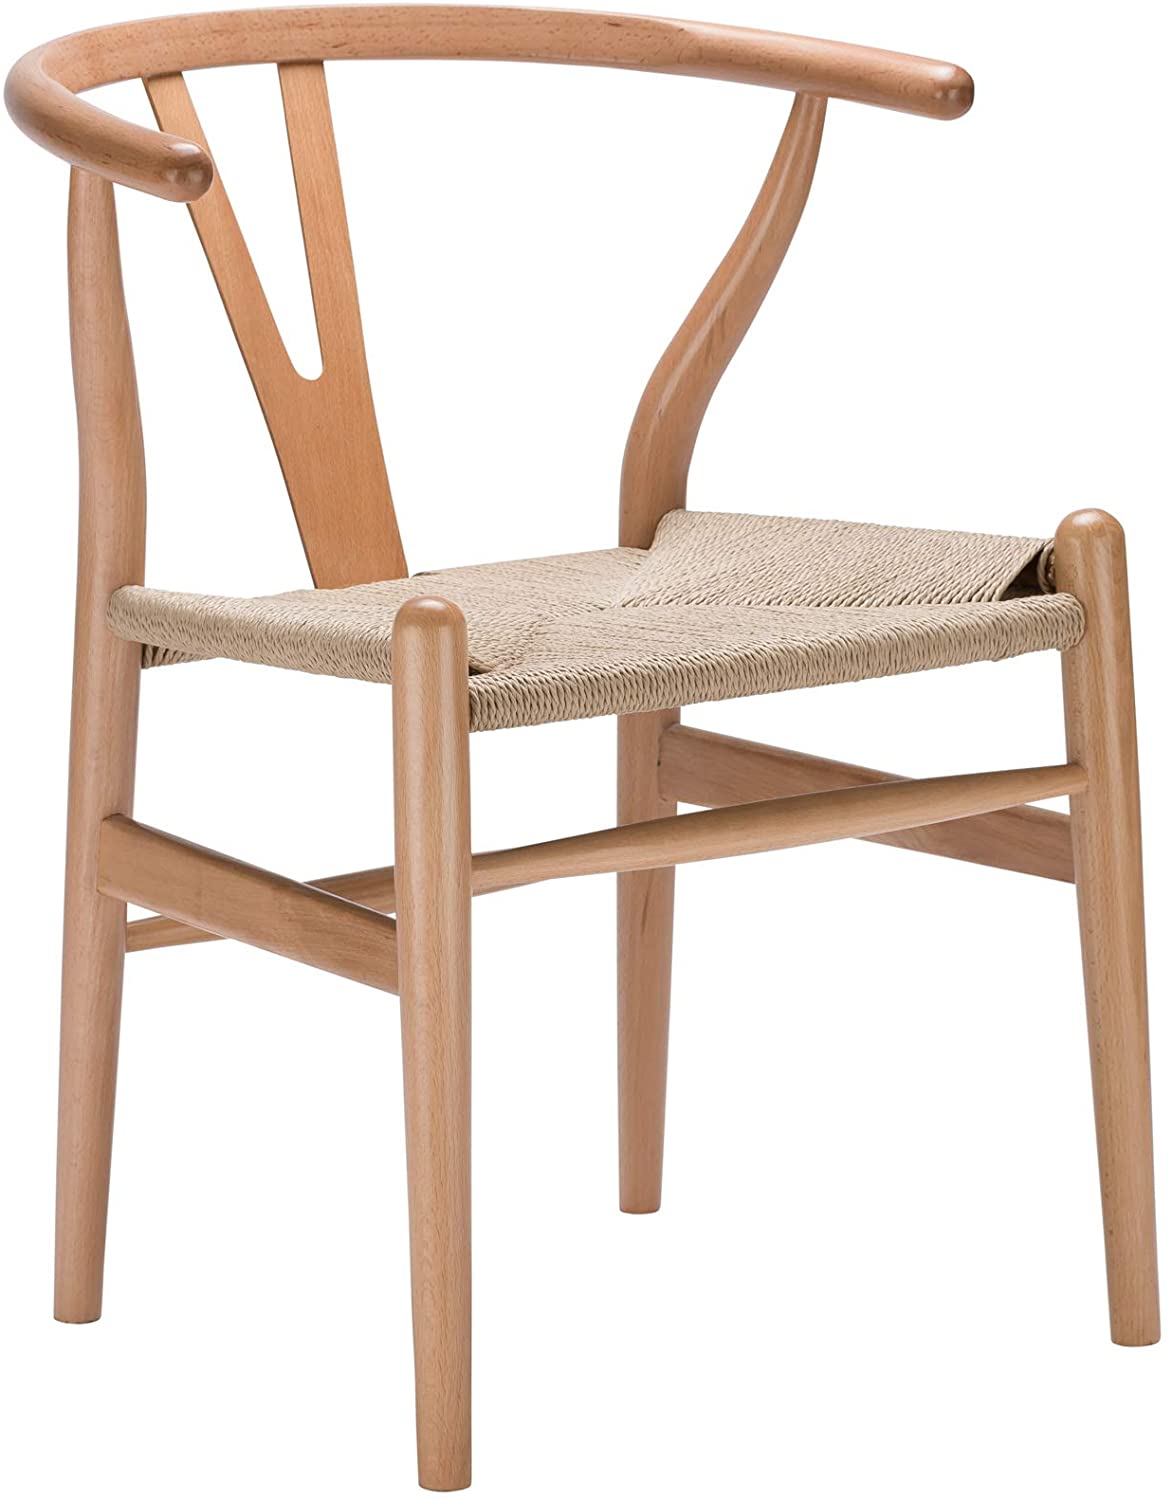 Poly And Bark Weave Modern Wooden Mid Century Dining Chair Hemp Seat 